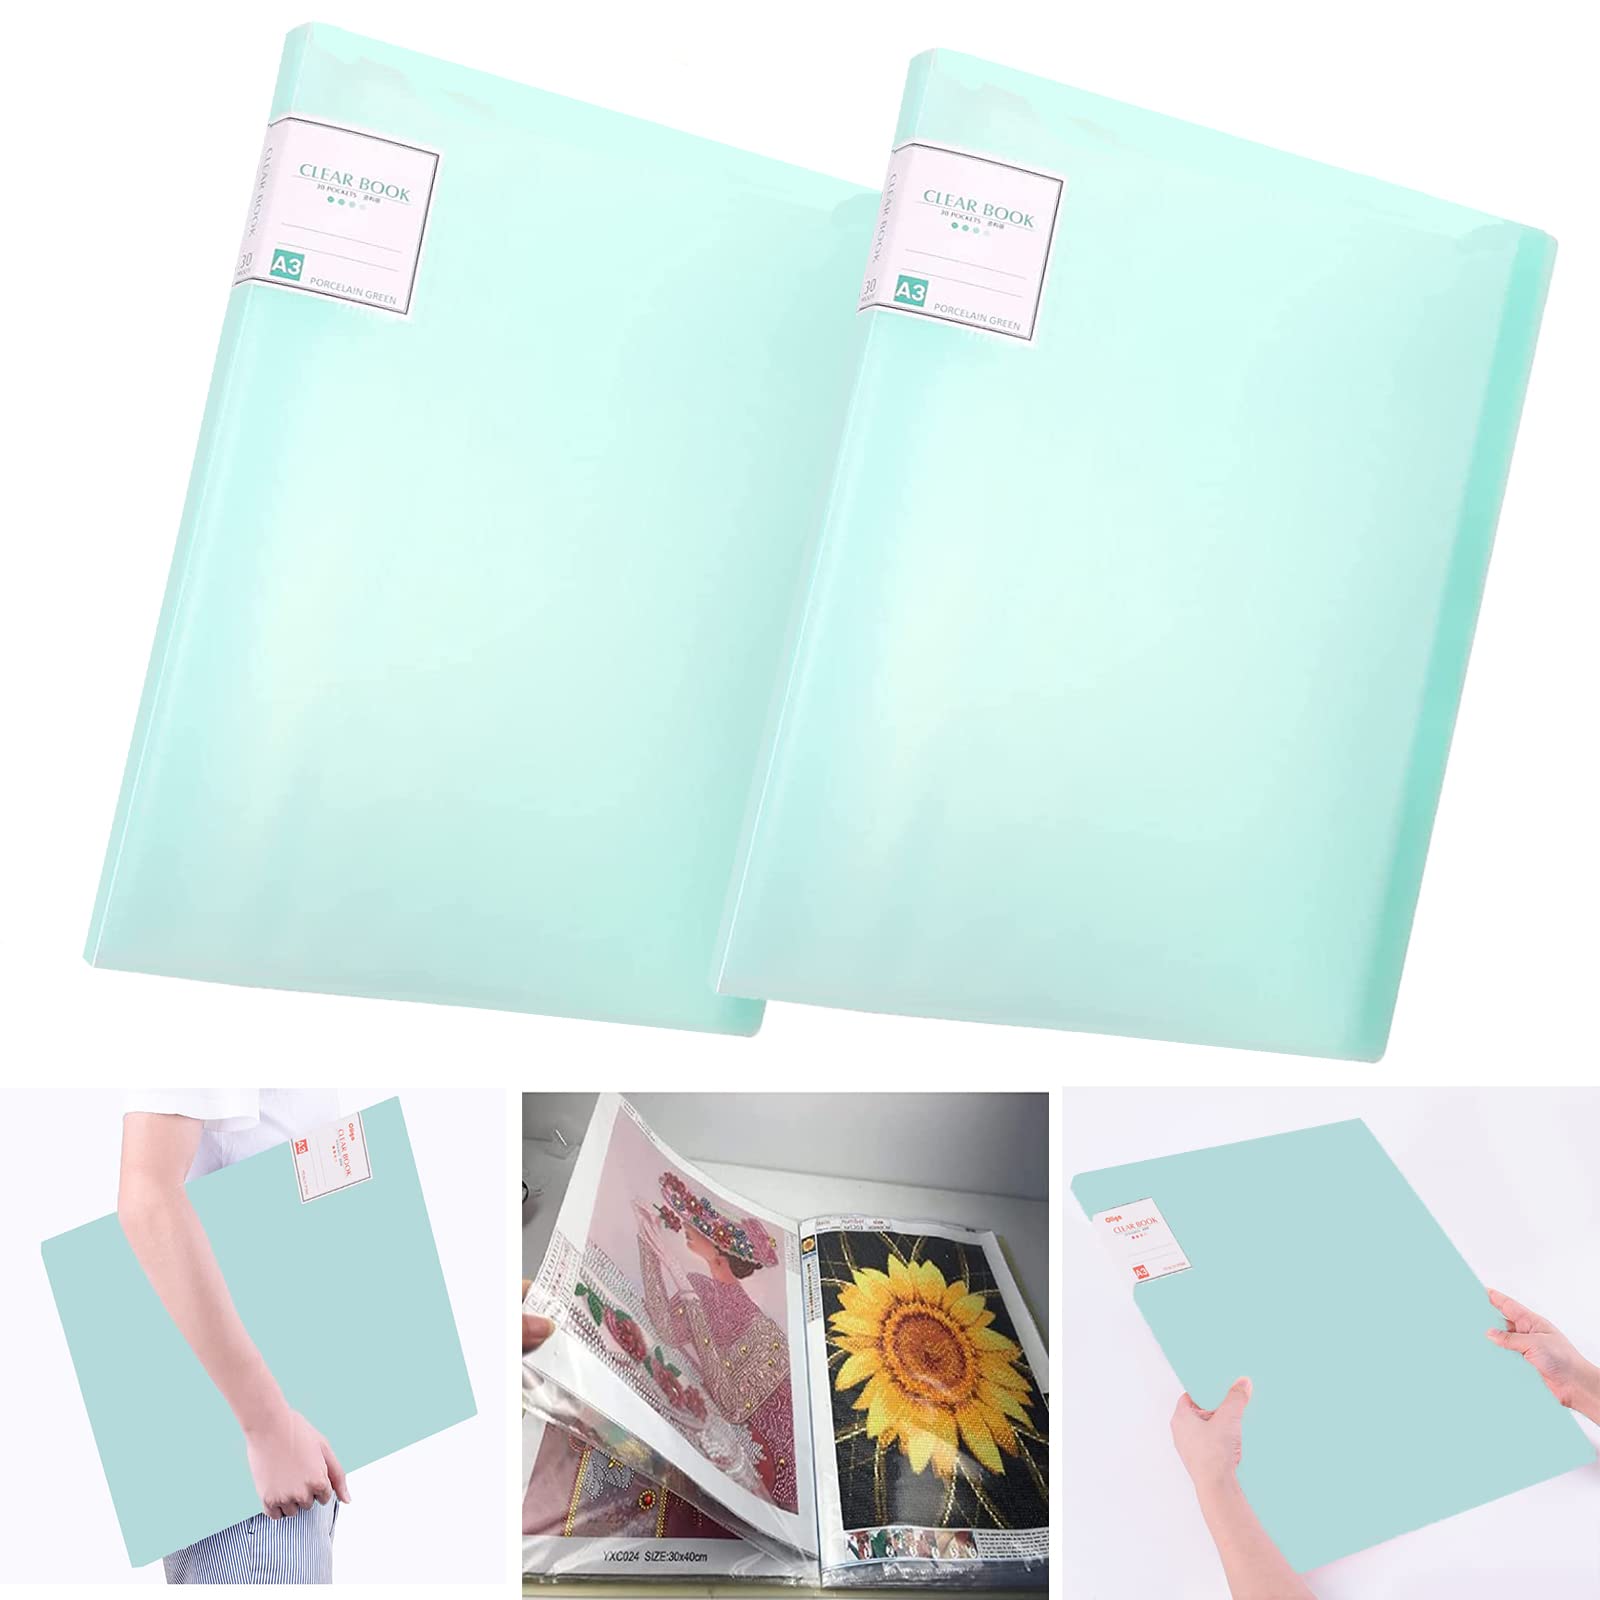 A3 Diamond Painting Storage Book Diamond Art Portfolio Folder for Diamond  Dotz Diamond Painting Accessories, 30-Page Clear Sleeves Large Capacity